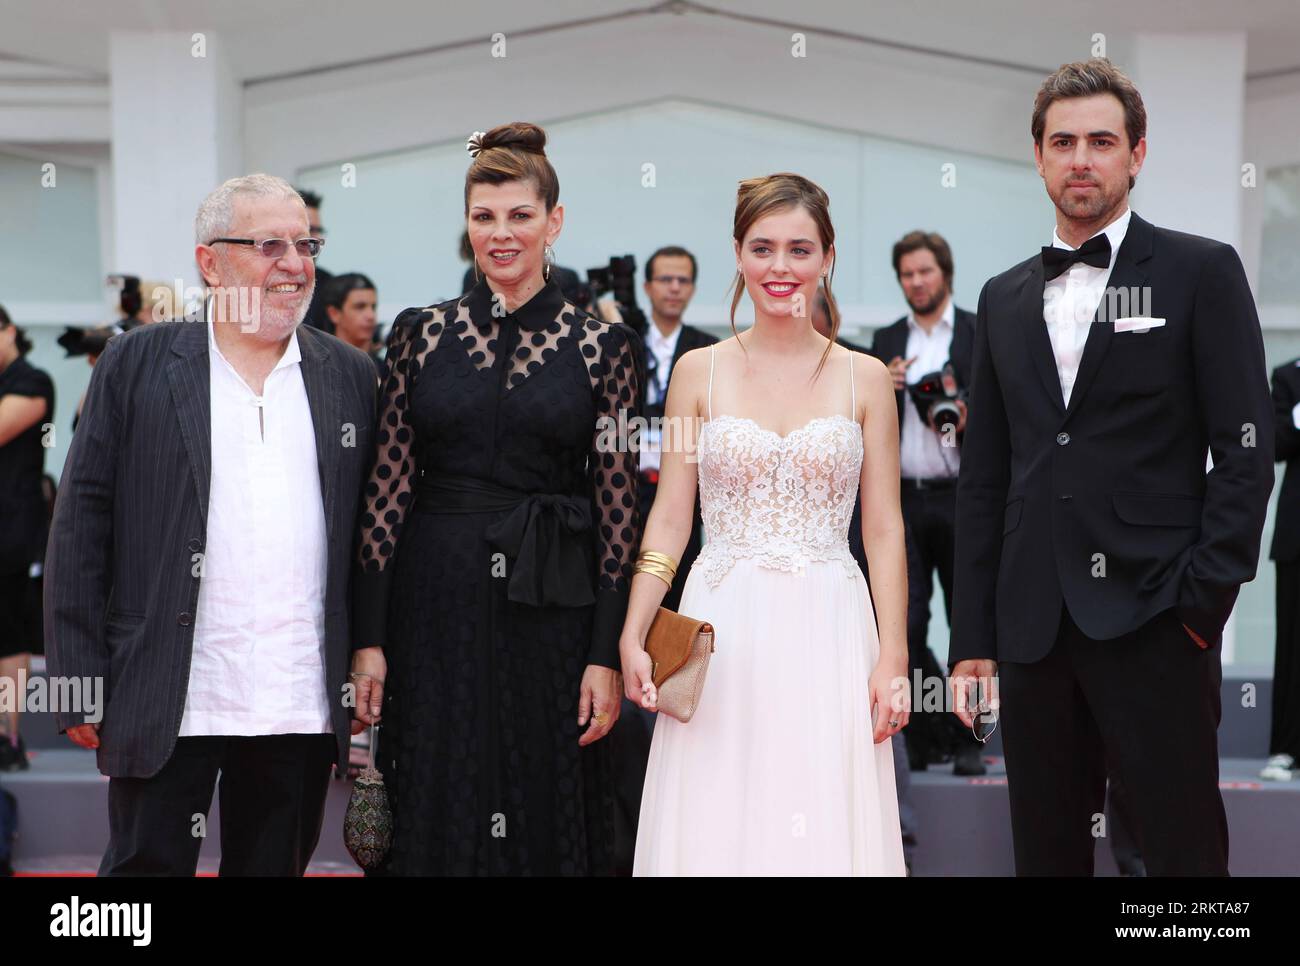 Bildnummer: 58419033  Datum: 02.09.2012  Copyright: imago/Xinhua (120903) -- VENICE, Sept. 2, 2012 (Xinhua) -- (From R to L) Israeli actor Yiftach Klein, actresses Hadas Yaron and Irit Sheleg, and actor Chaim Sharir arrive at the red carpet before the premiere of the Israeli film Lemale Et Ha Chalal (Fill the Void) at the 69th Venice International Film Festival in Venice, Italy, on Sept. 2, 2012. (Xinhua/Gao Jing) (lr) ITALY-VENICE-FILM FESTIVAL- LEMALE ET HA CHALAL -PREMIERE PUBLICATIONxNOTxINxCHN Kultur Entertainment People Film 69. Internationale Filmfestspiele Venedig Filmpremiere Premiere Stock Photo